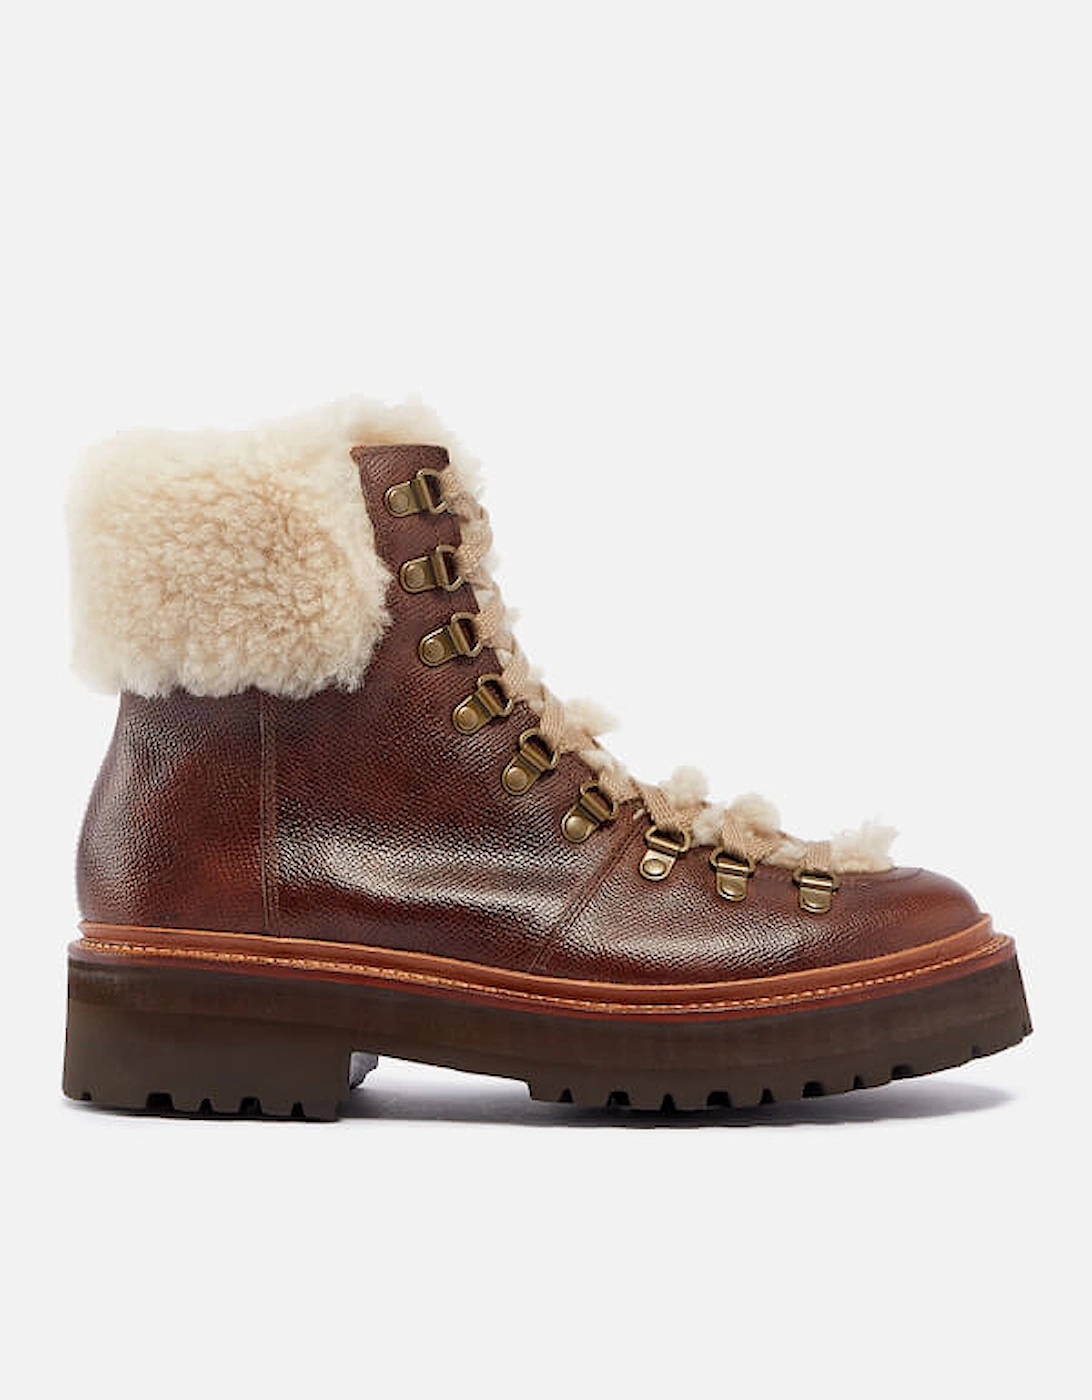 Nettie Leather and Shearling Hiking-Style Boots - - Home - Women's Shoes - Women's Boots - Nettie Leather and Shearling Hiking-Style Boots, 3 of 2